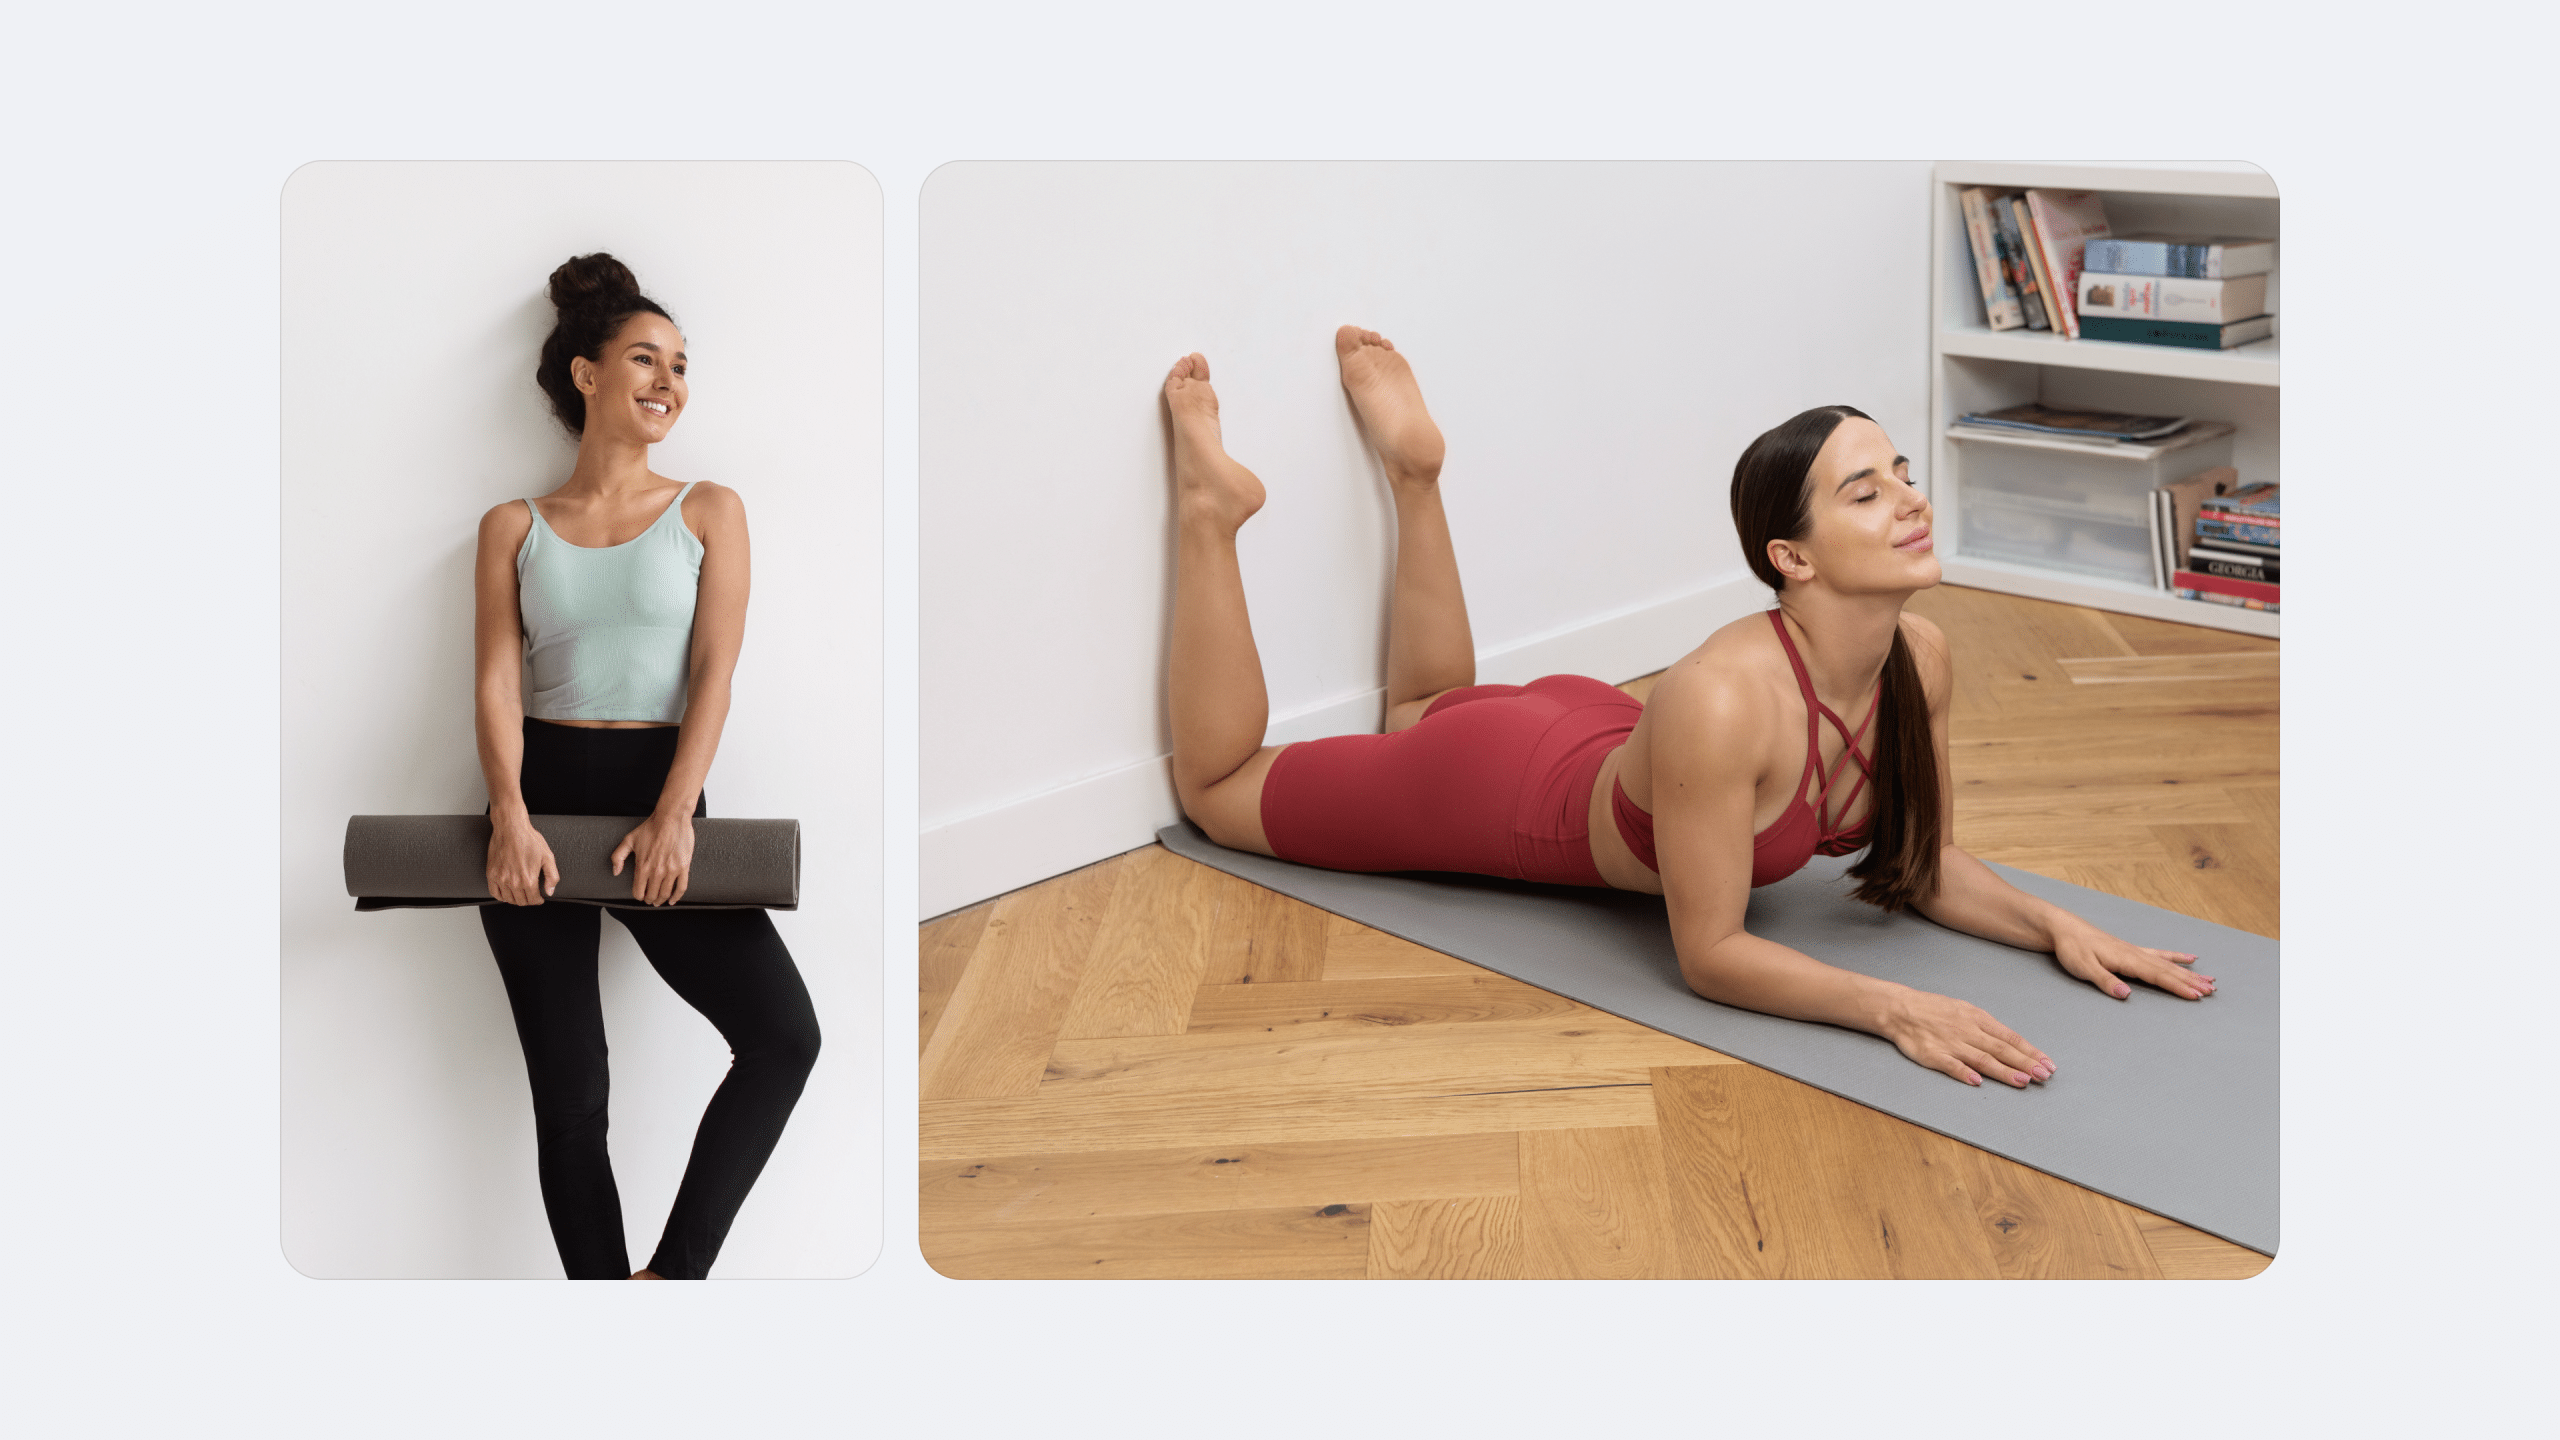 Pilates 4 You - THIS WEEKS PEAK POSE: Double Leg Stretch 😊 The